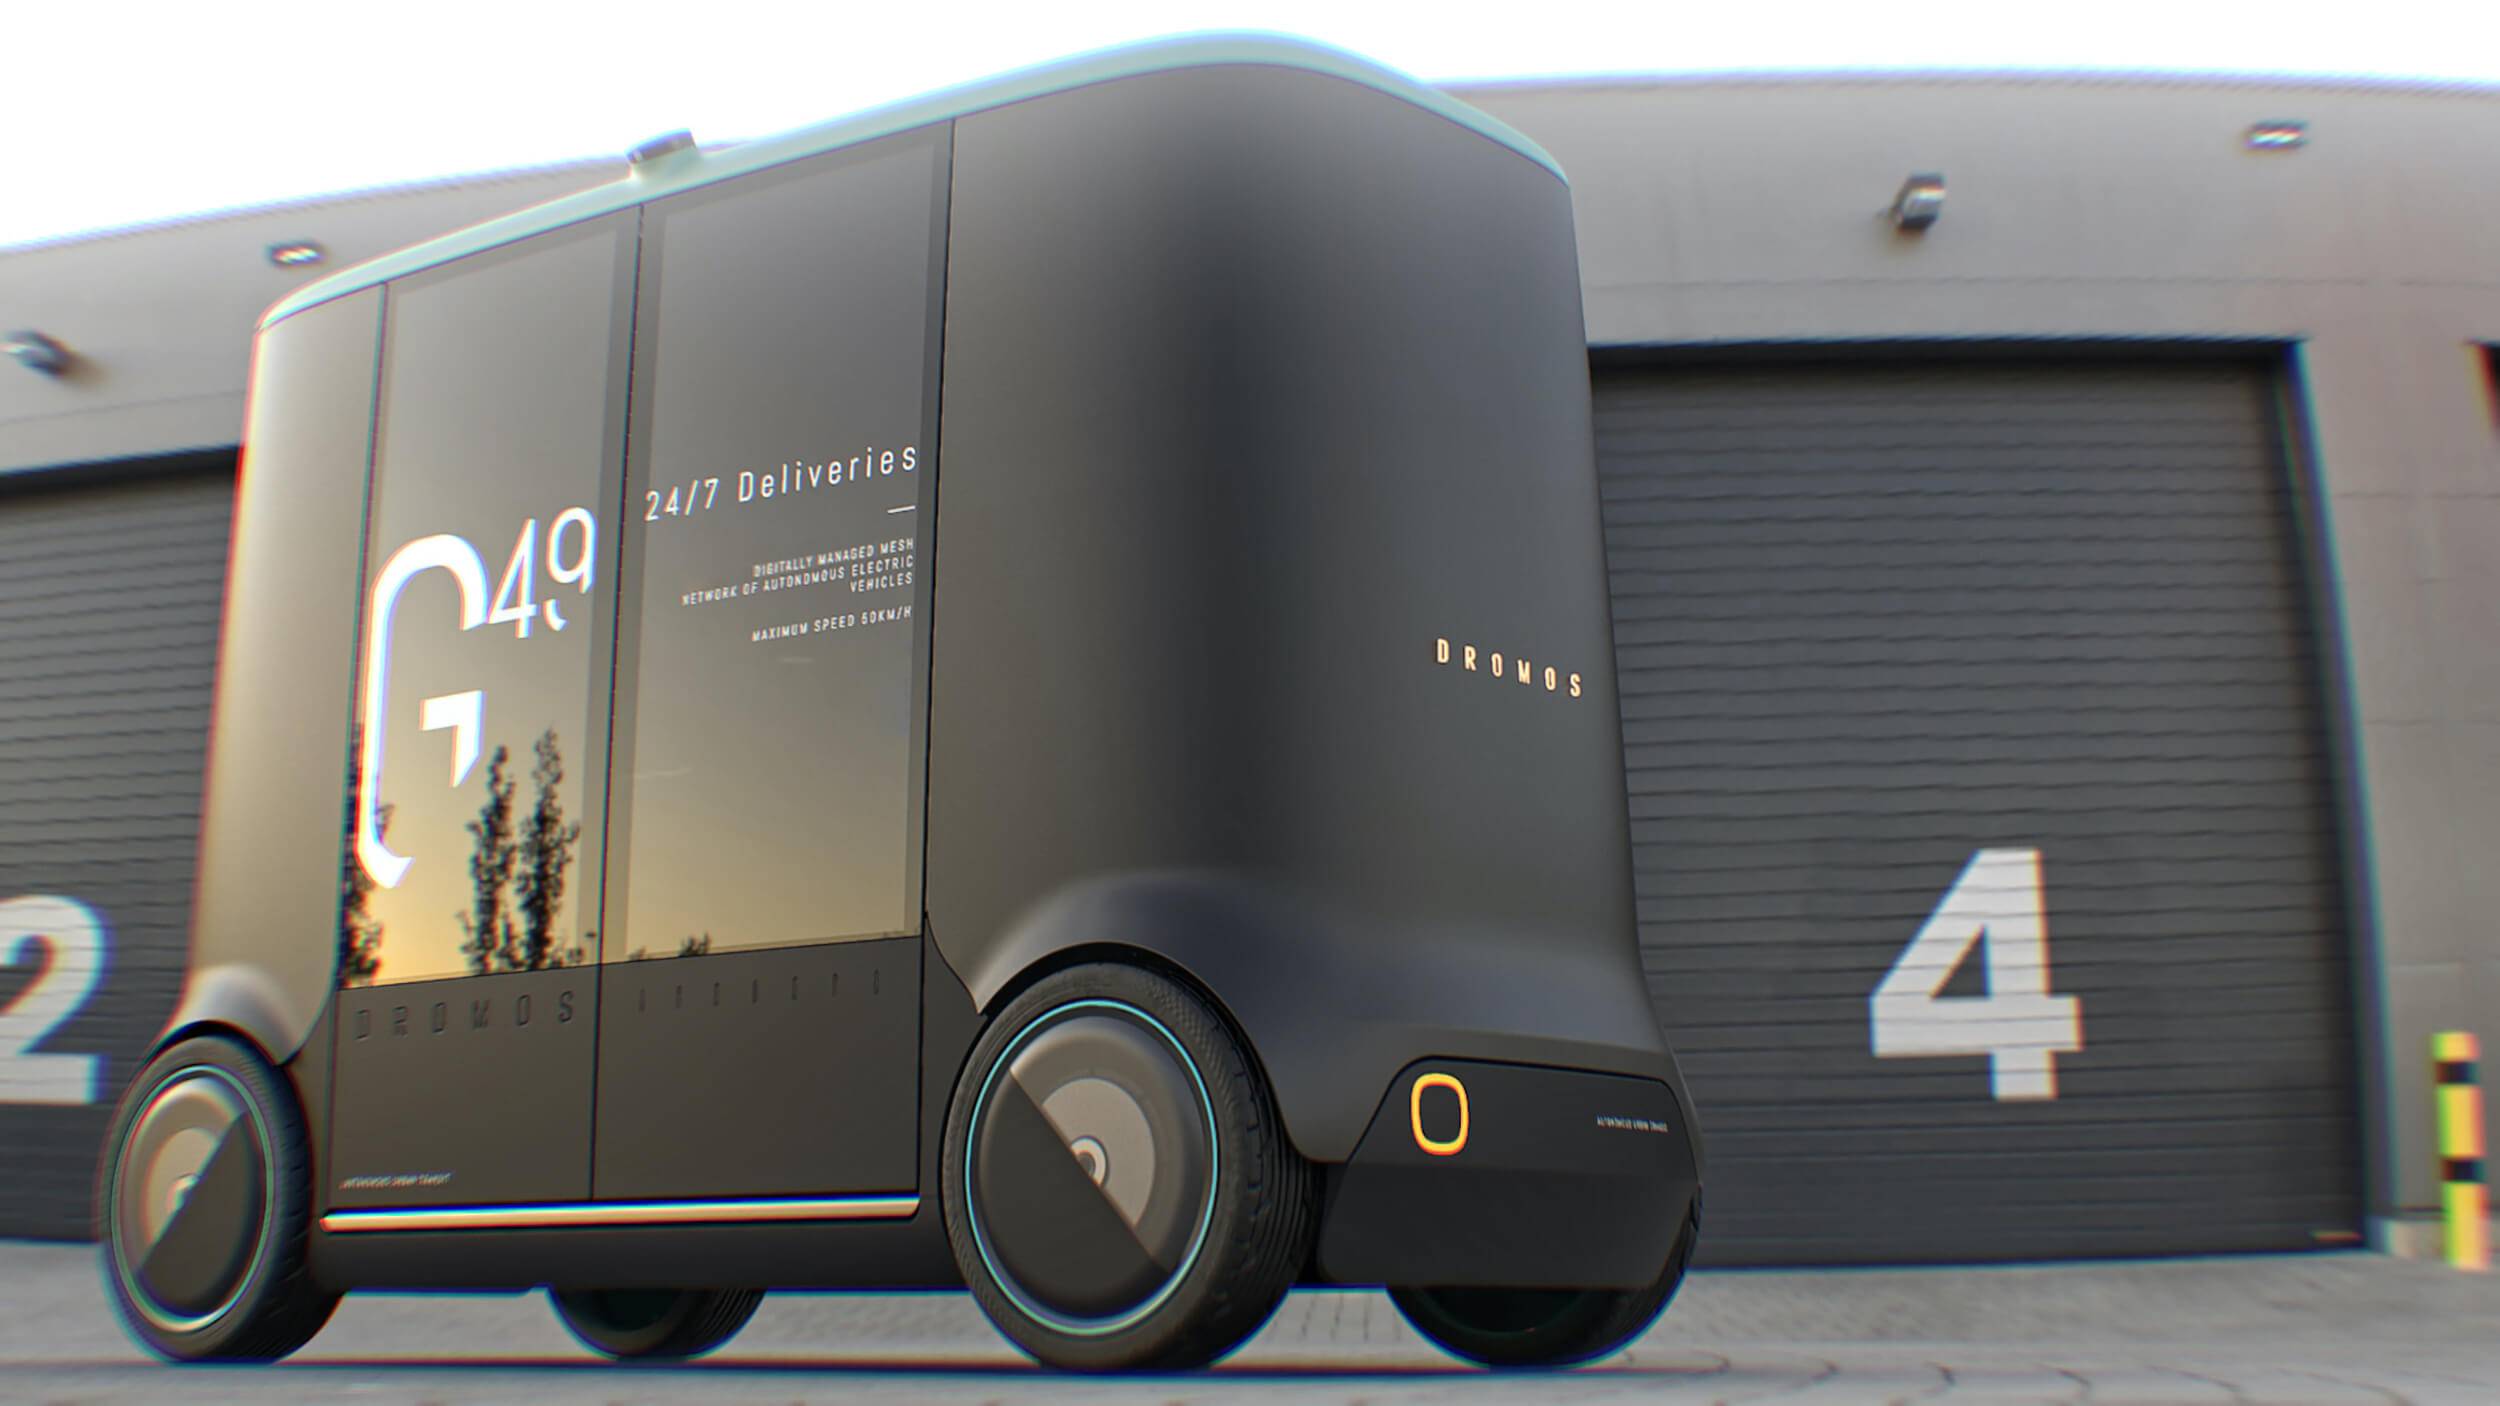 View of the Dromos autonomous vehicle adapted for freight use